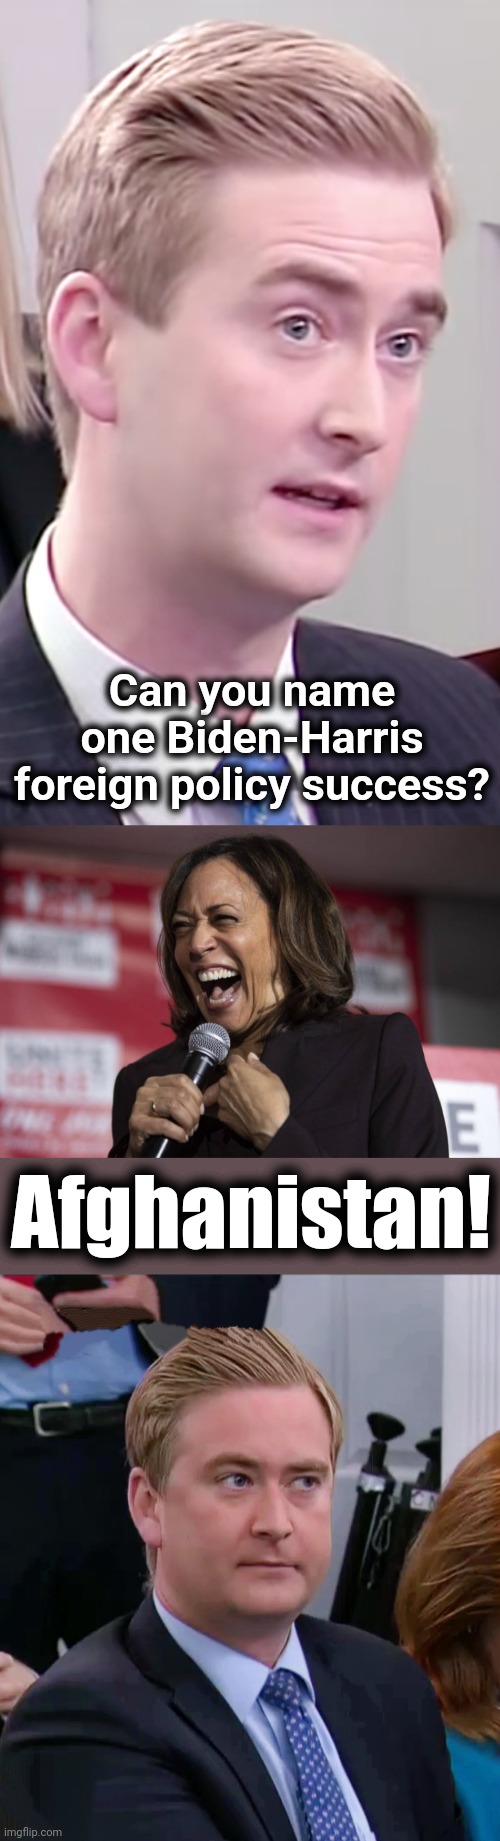 Diplomacy is dead | Can you name one Biden-Harris foreign policy success? Afghanistan! | image tagged in kamala laughing,joe biden,diplomacy,democrats,afghanistan,weakness | made w/ Imgflip meme maker